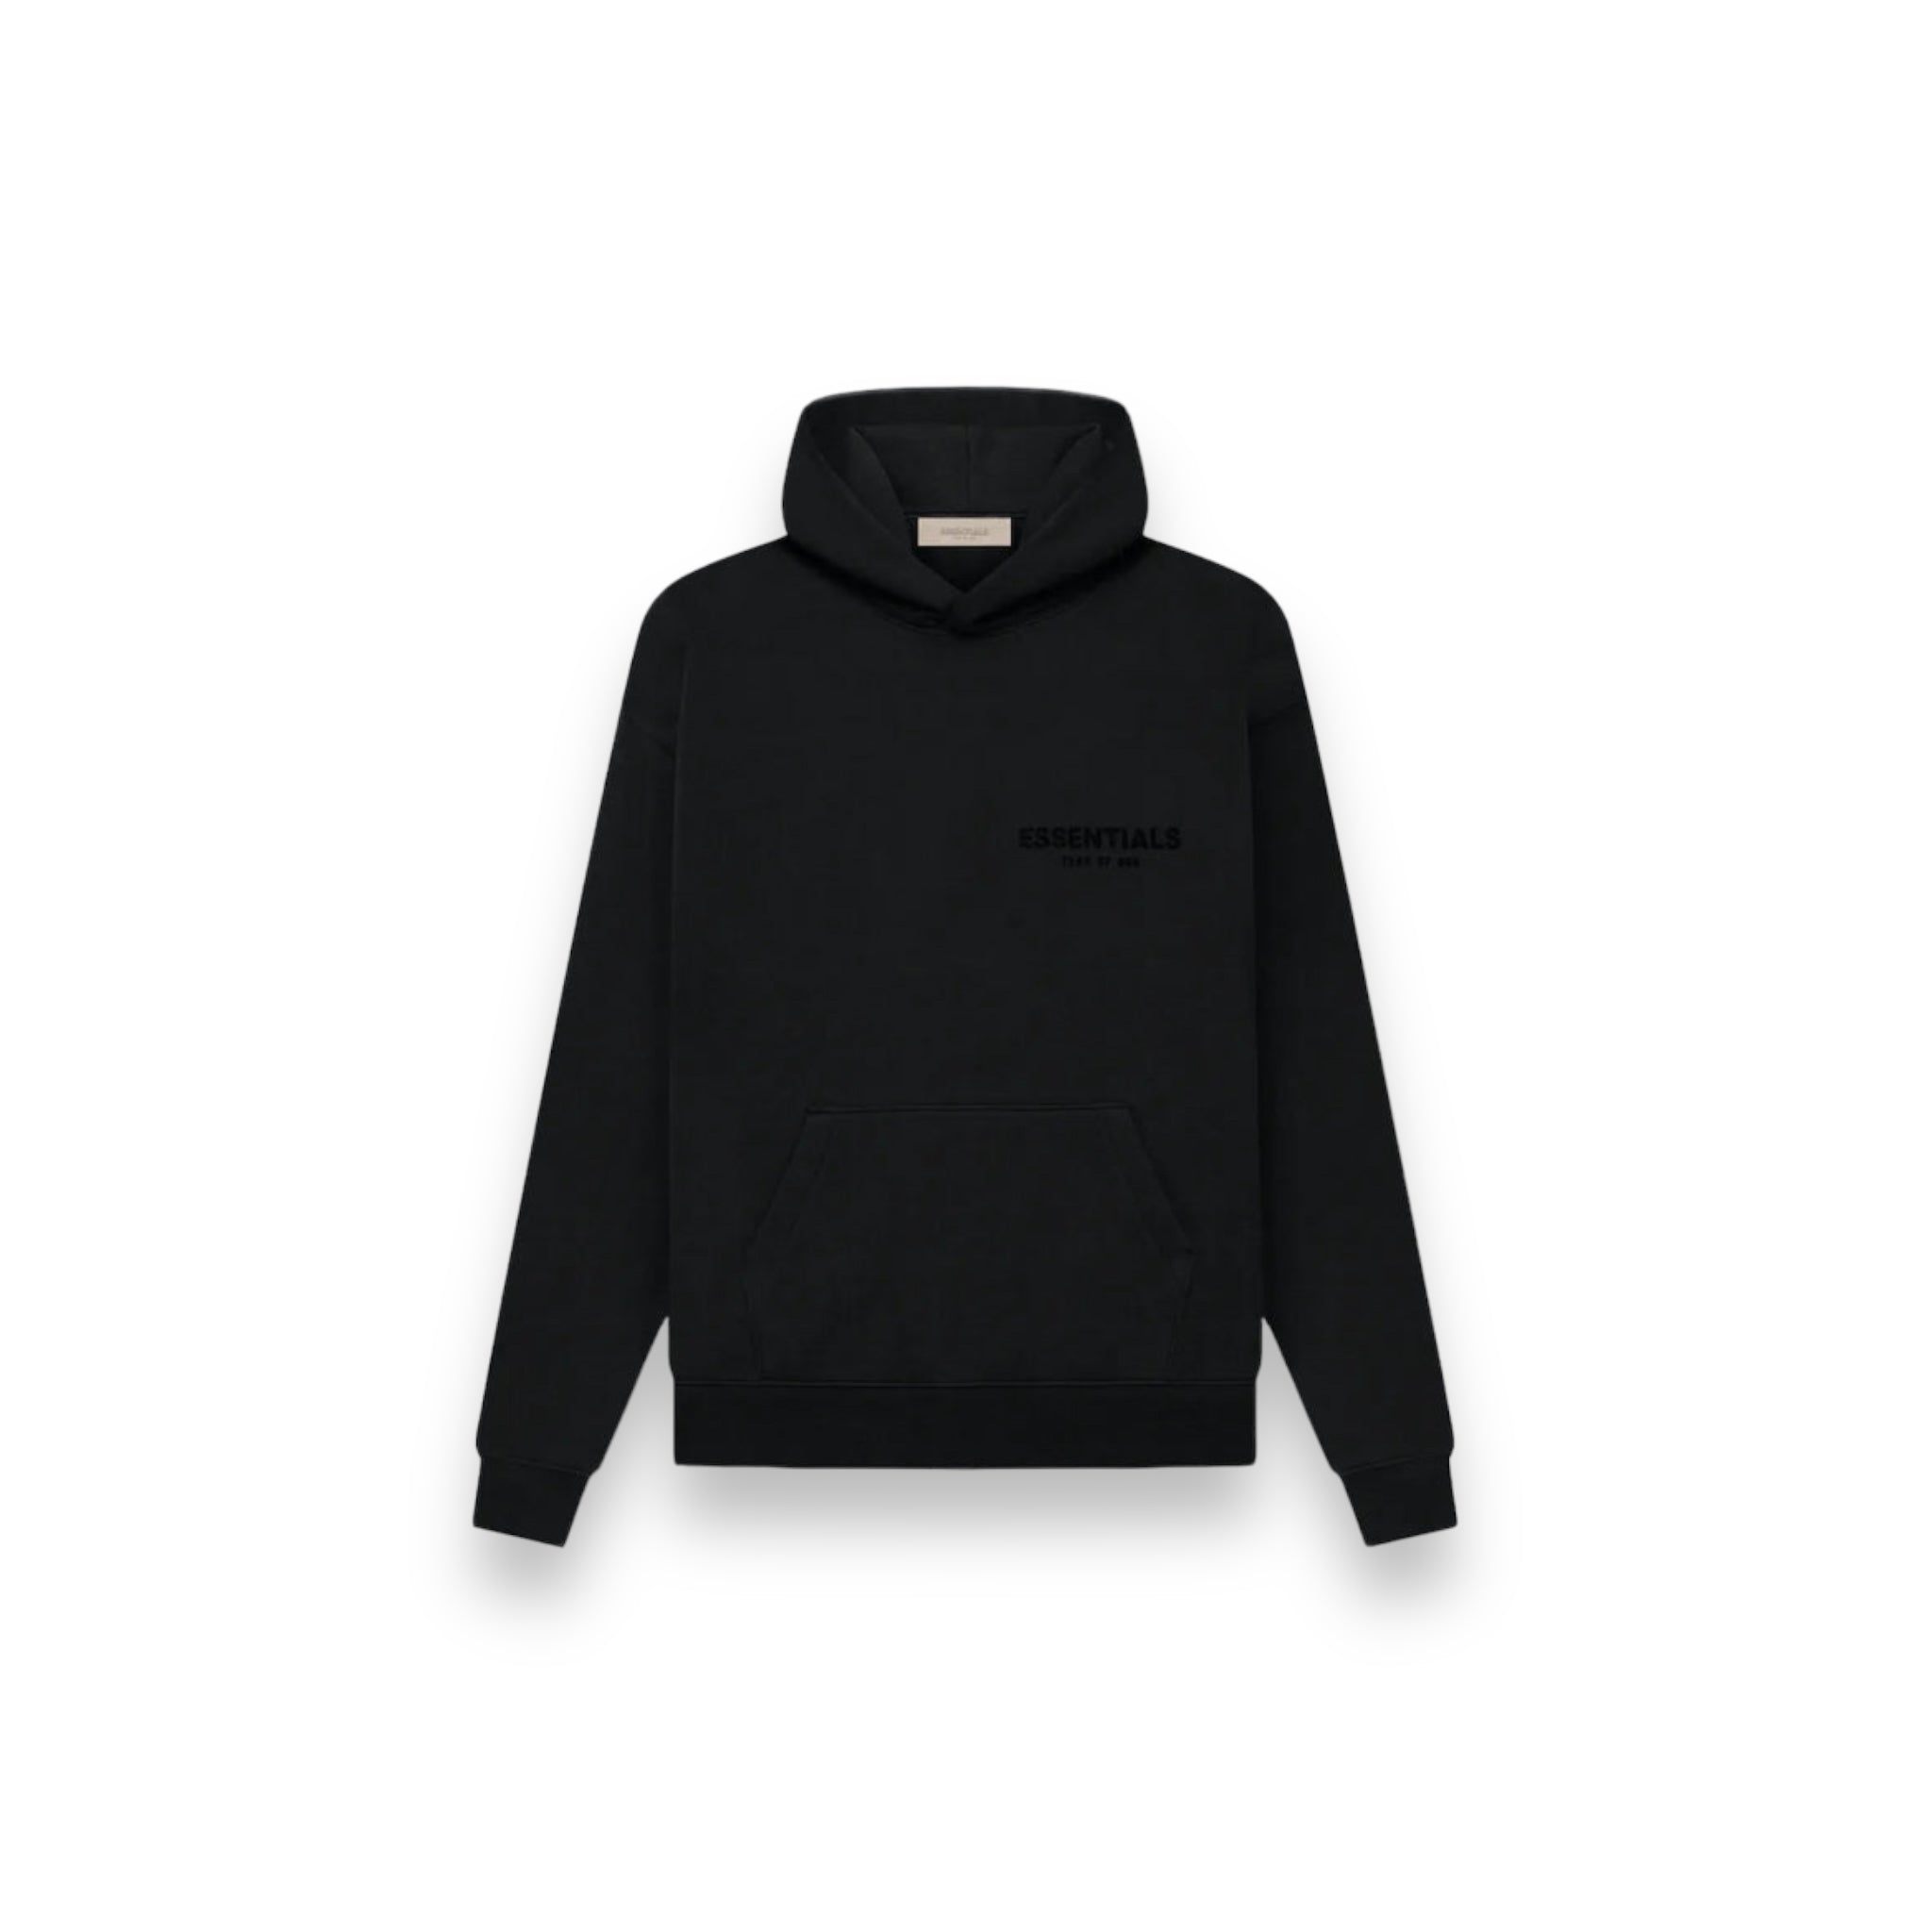 Fear of God Essentials Core Stretch Limo Black Hoodie SS22